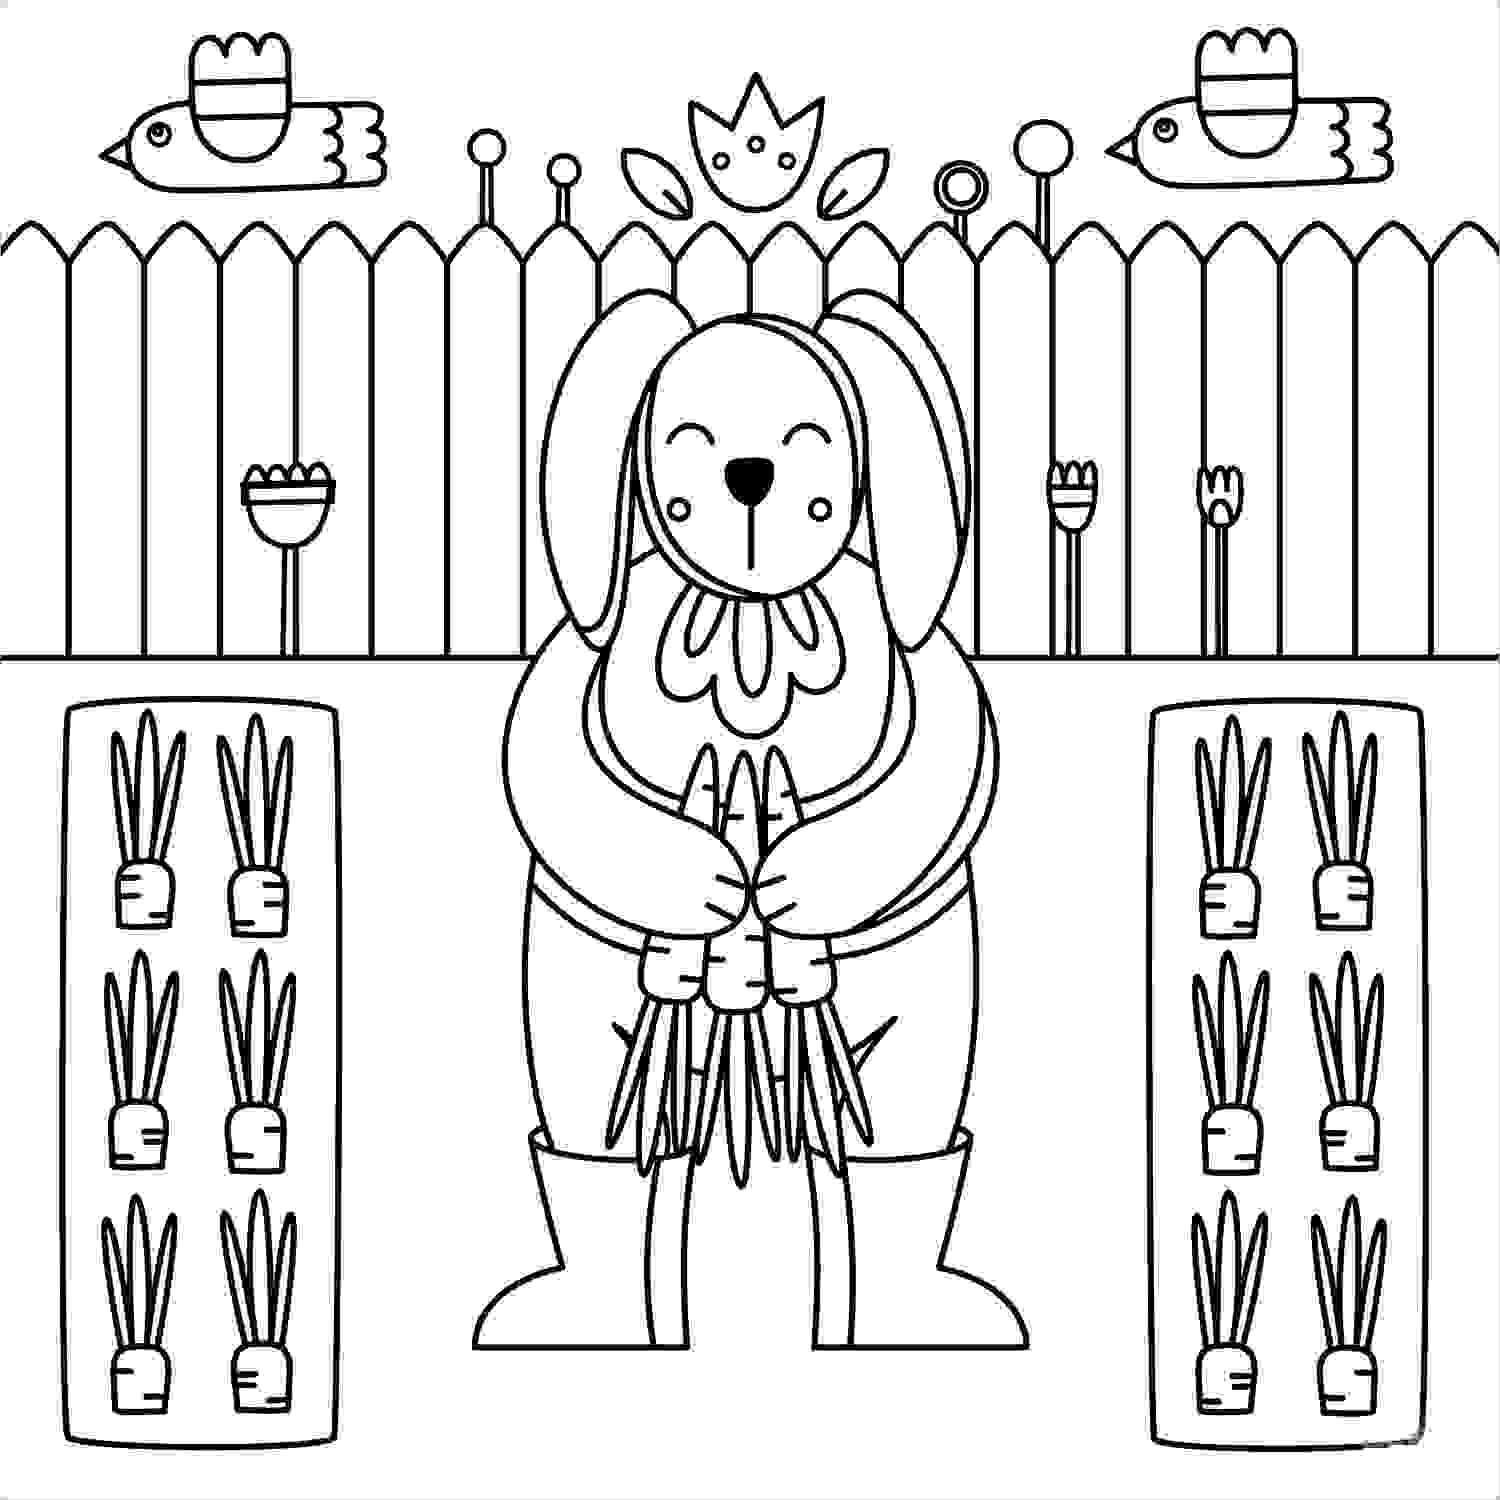 Bunny Harvests Carrots In The Garden Coloring Pages